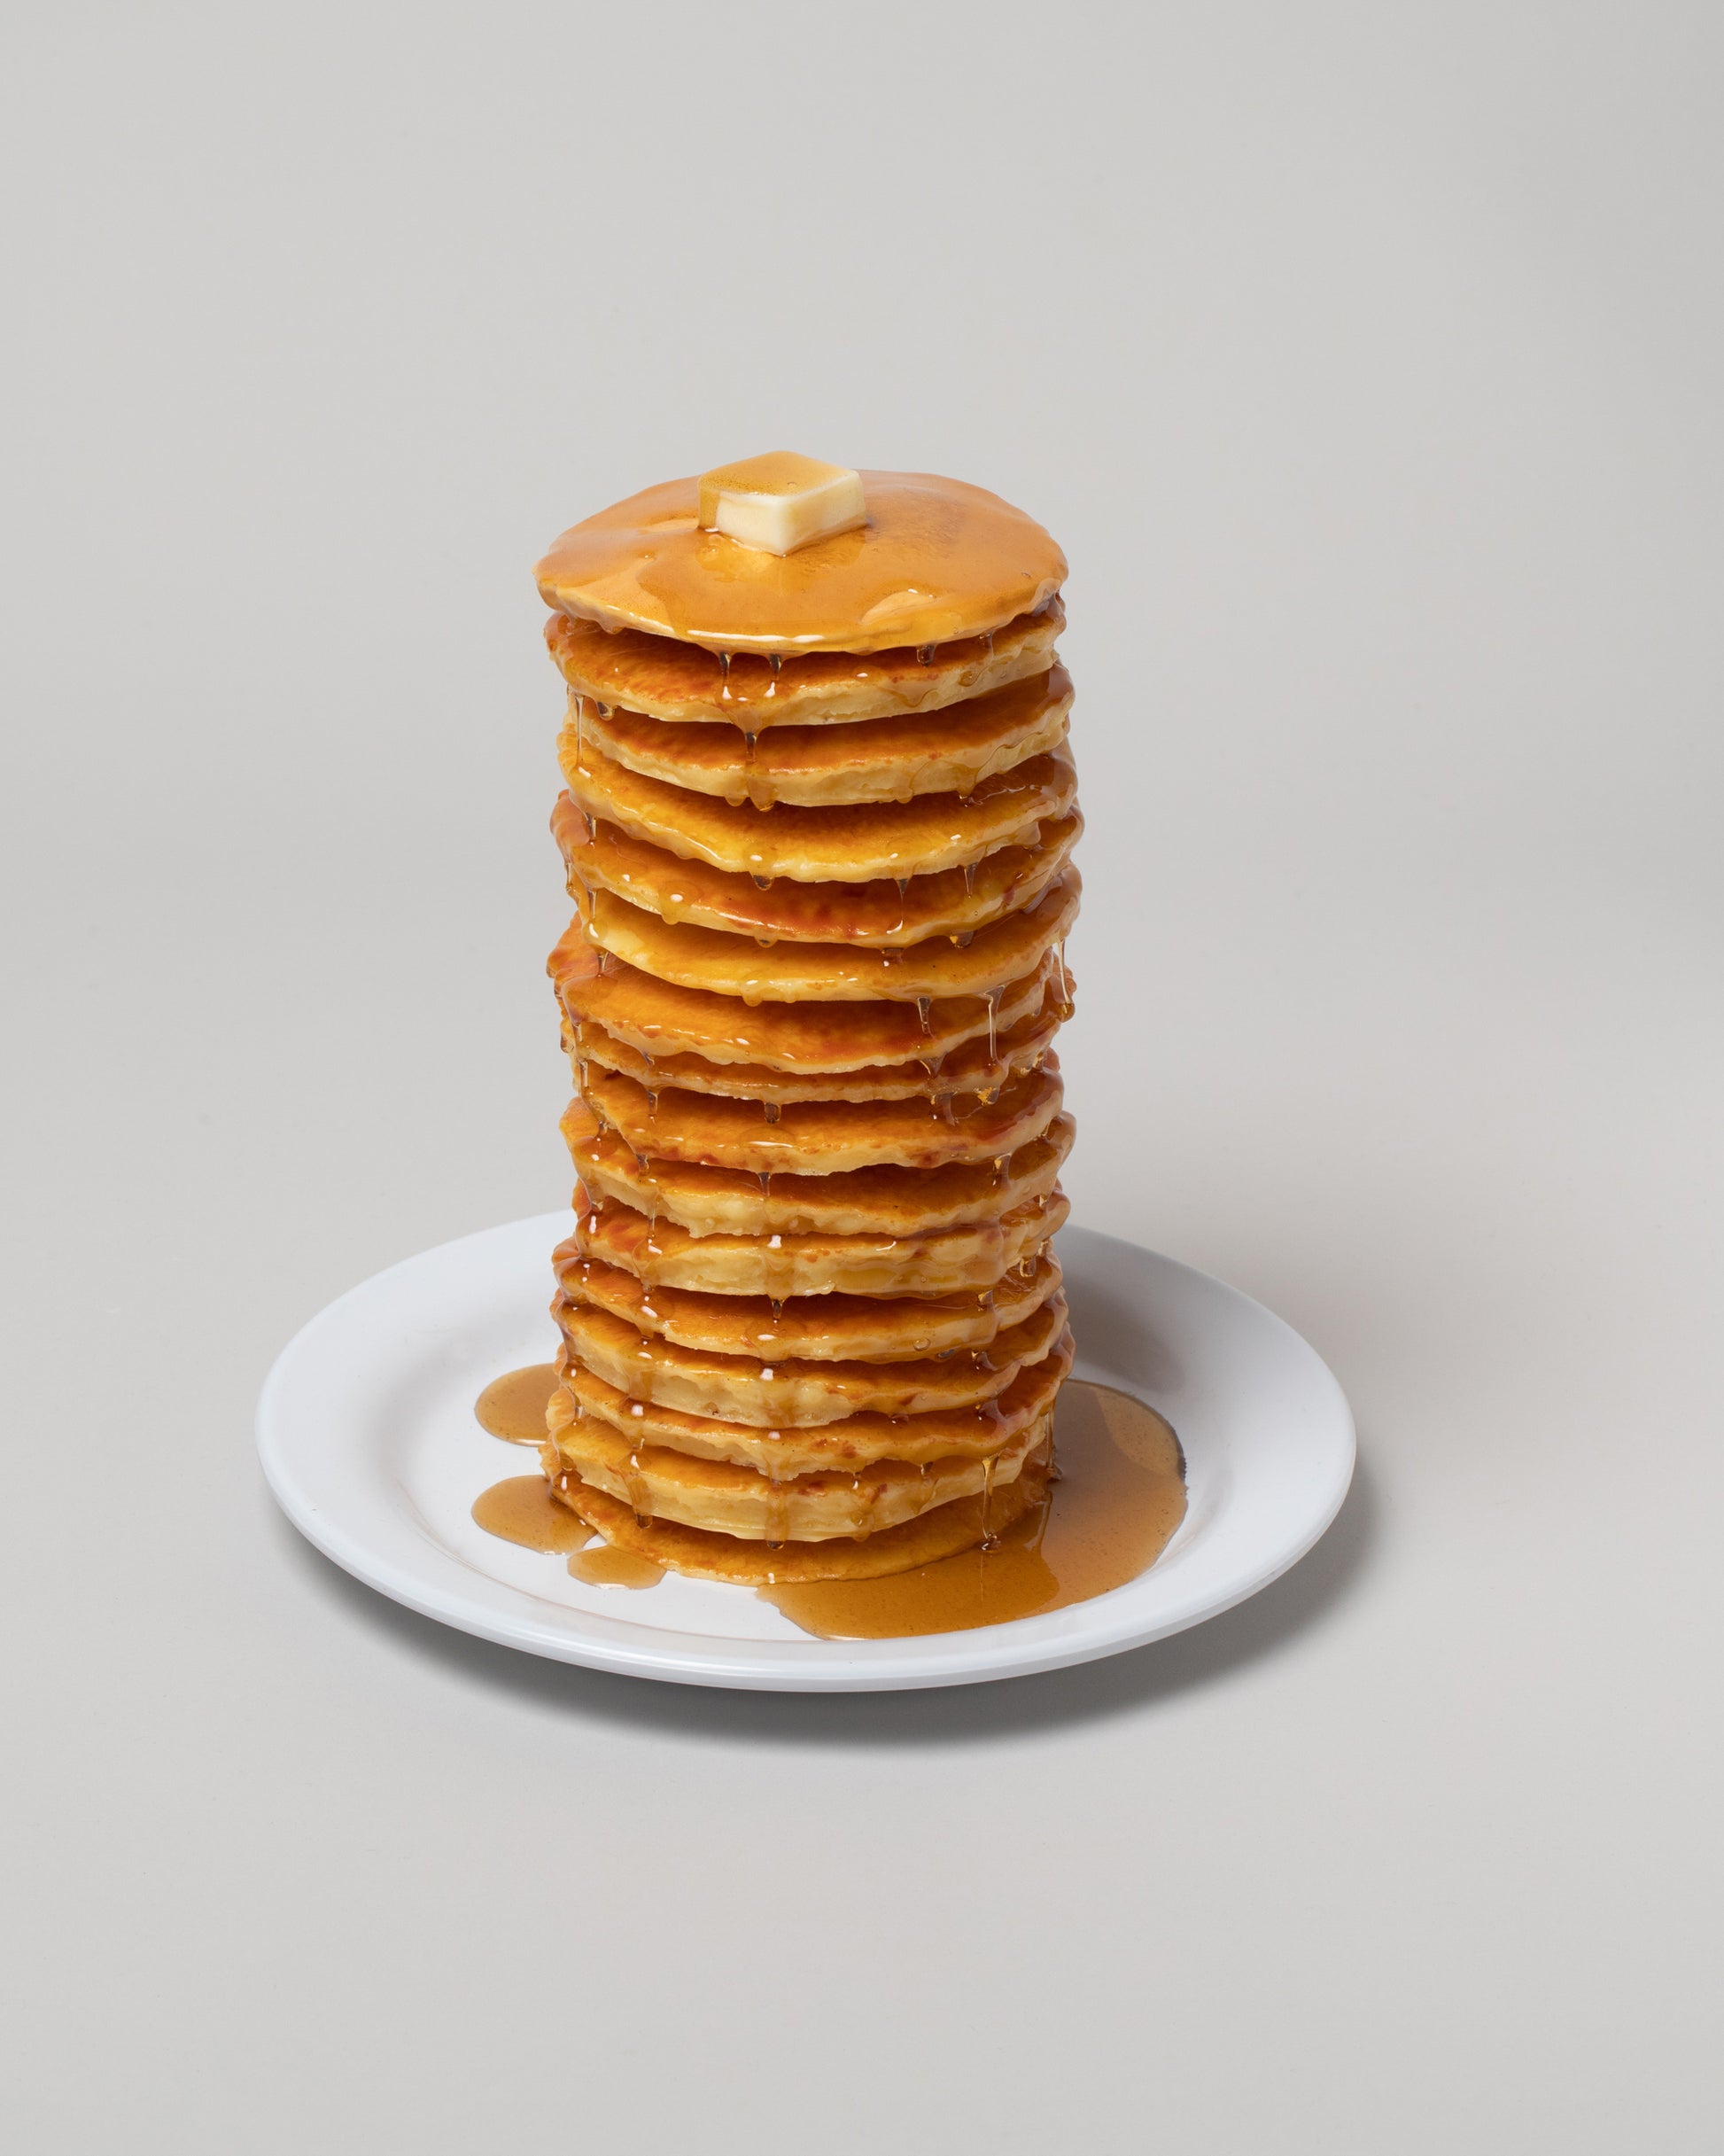 Closeup detail of the Spills Tall Stack Pancakes & Waffles on light color background.